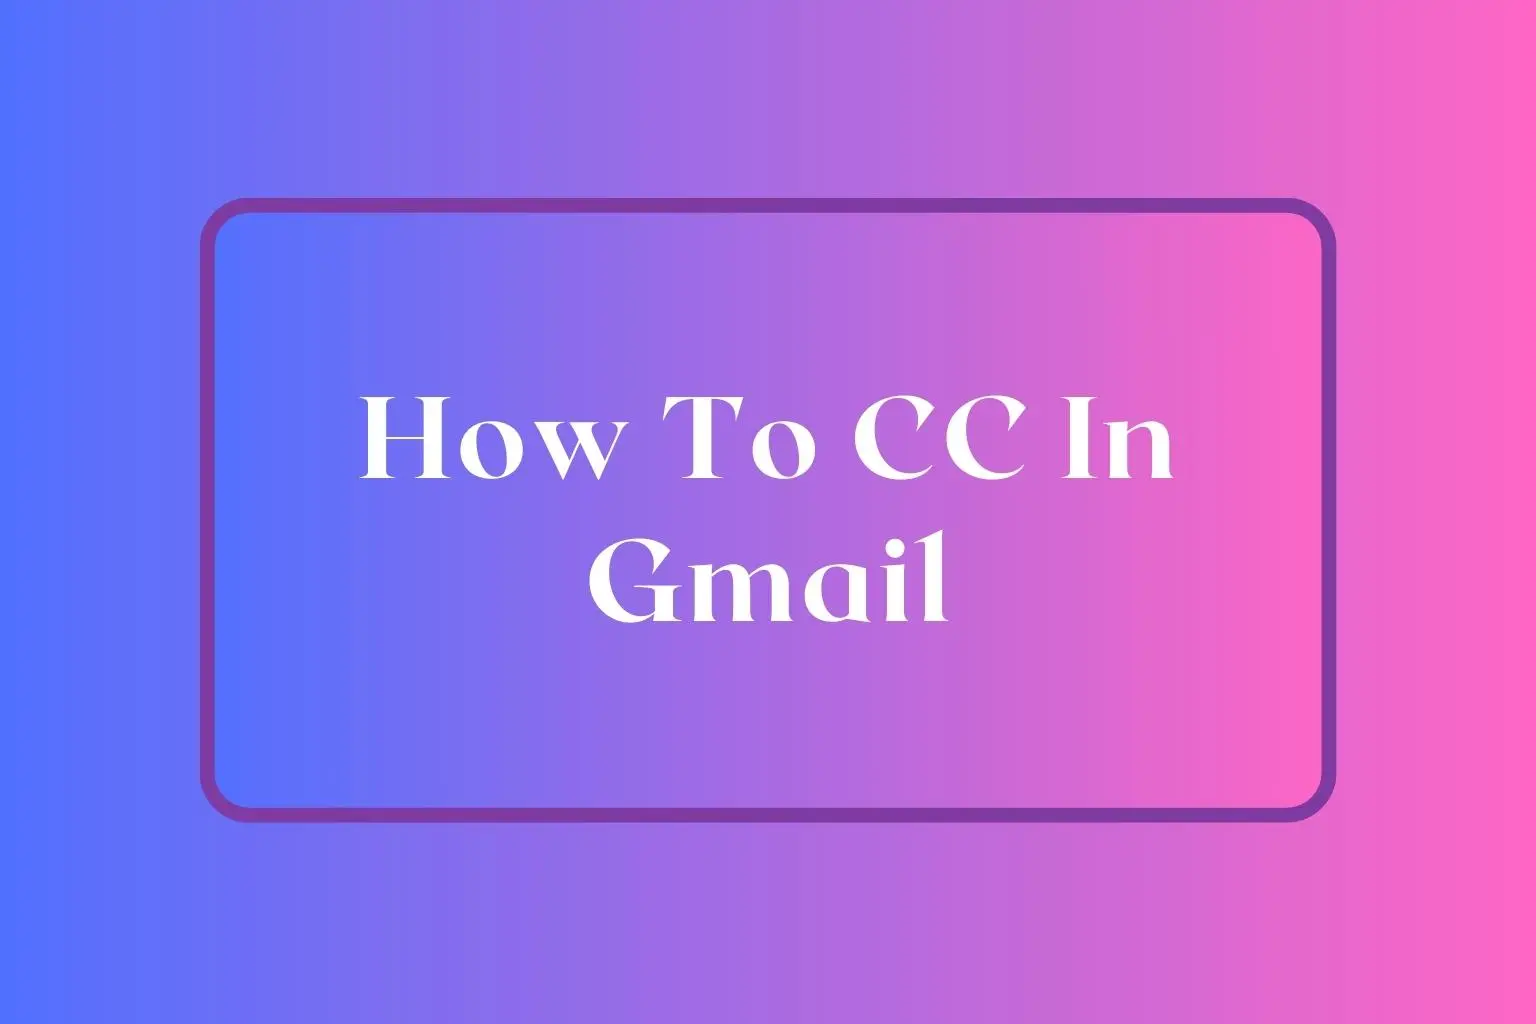 How To CC In Gmail